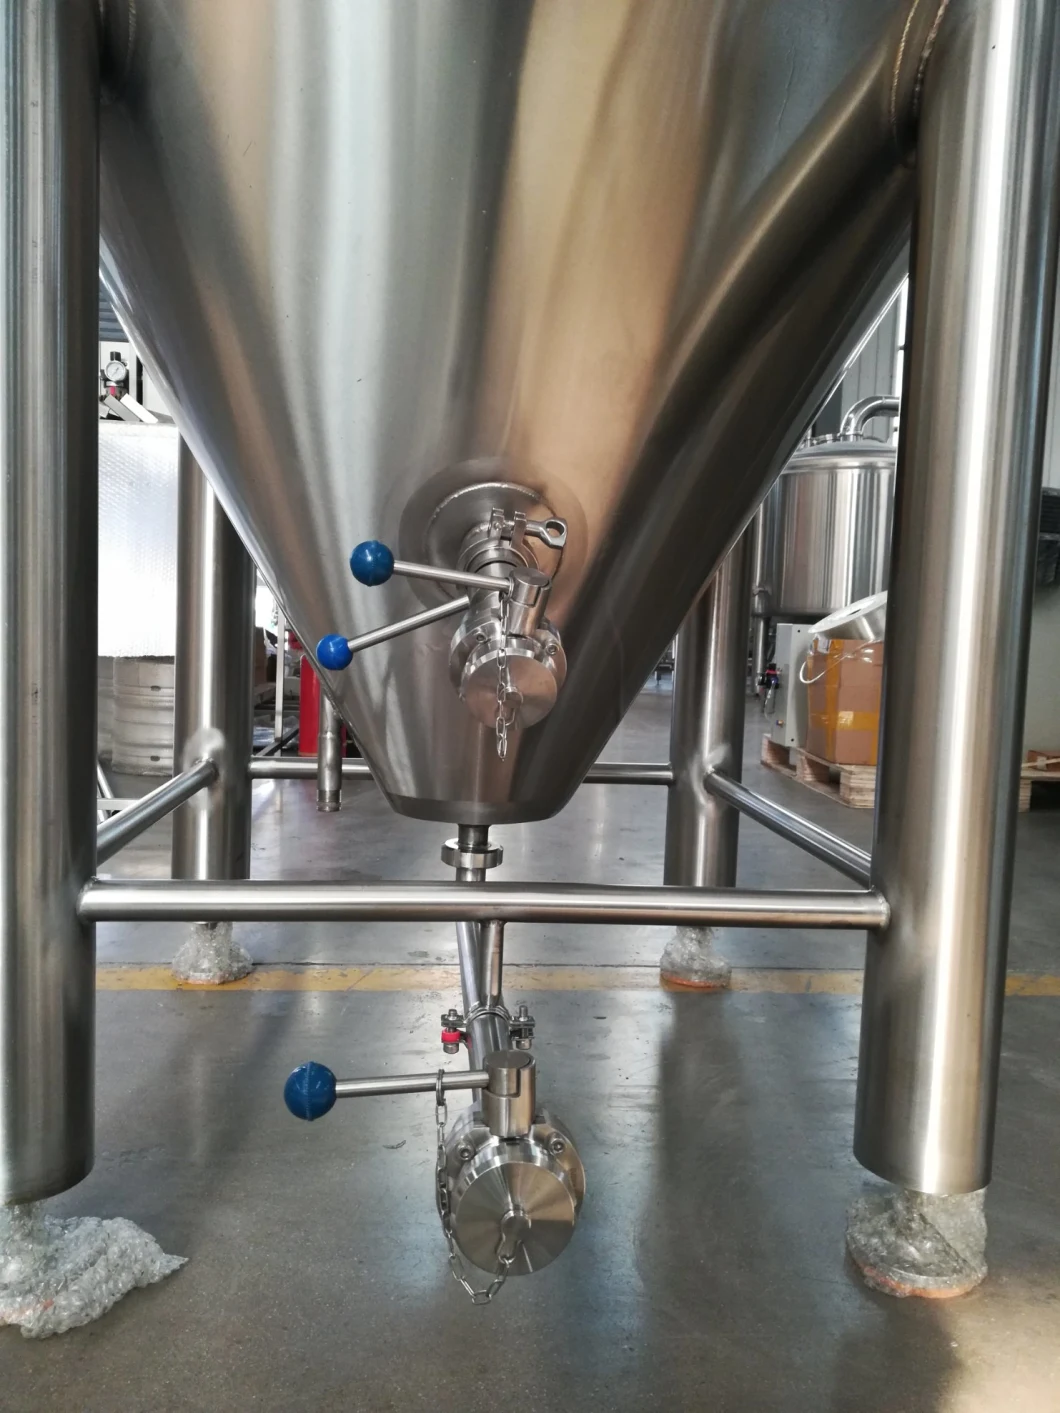 Turnkey Brewery 1000L 1500L 2000L 3000L Beer Machine Beer Brewery Brewing Equipment for Sale